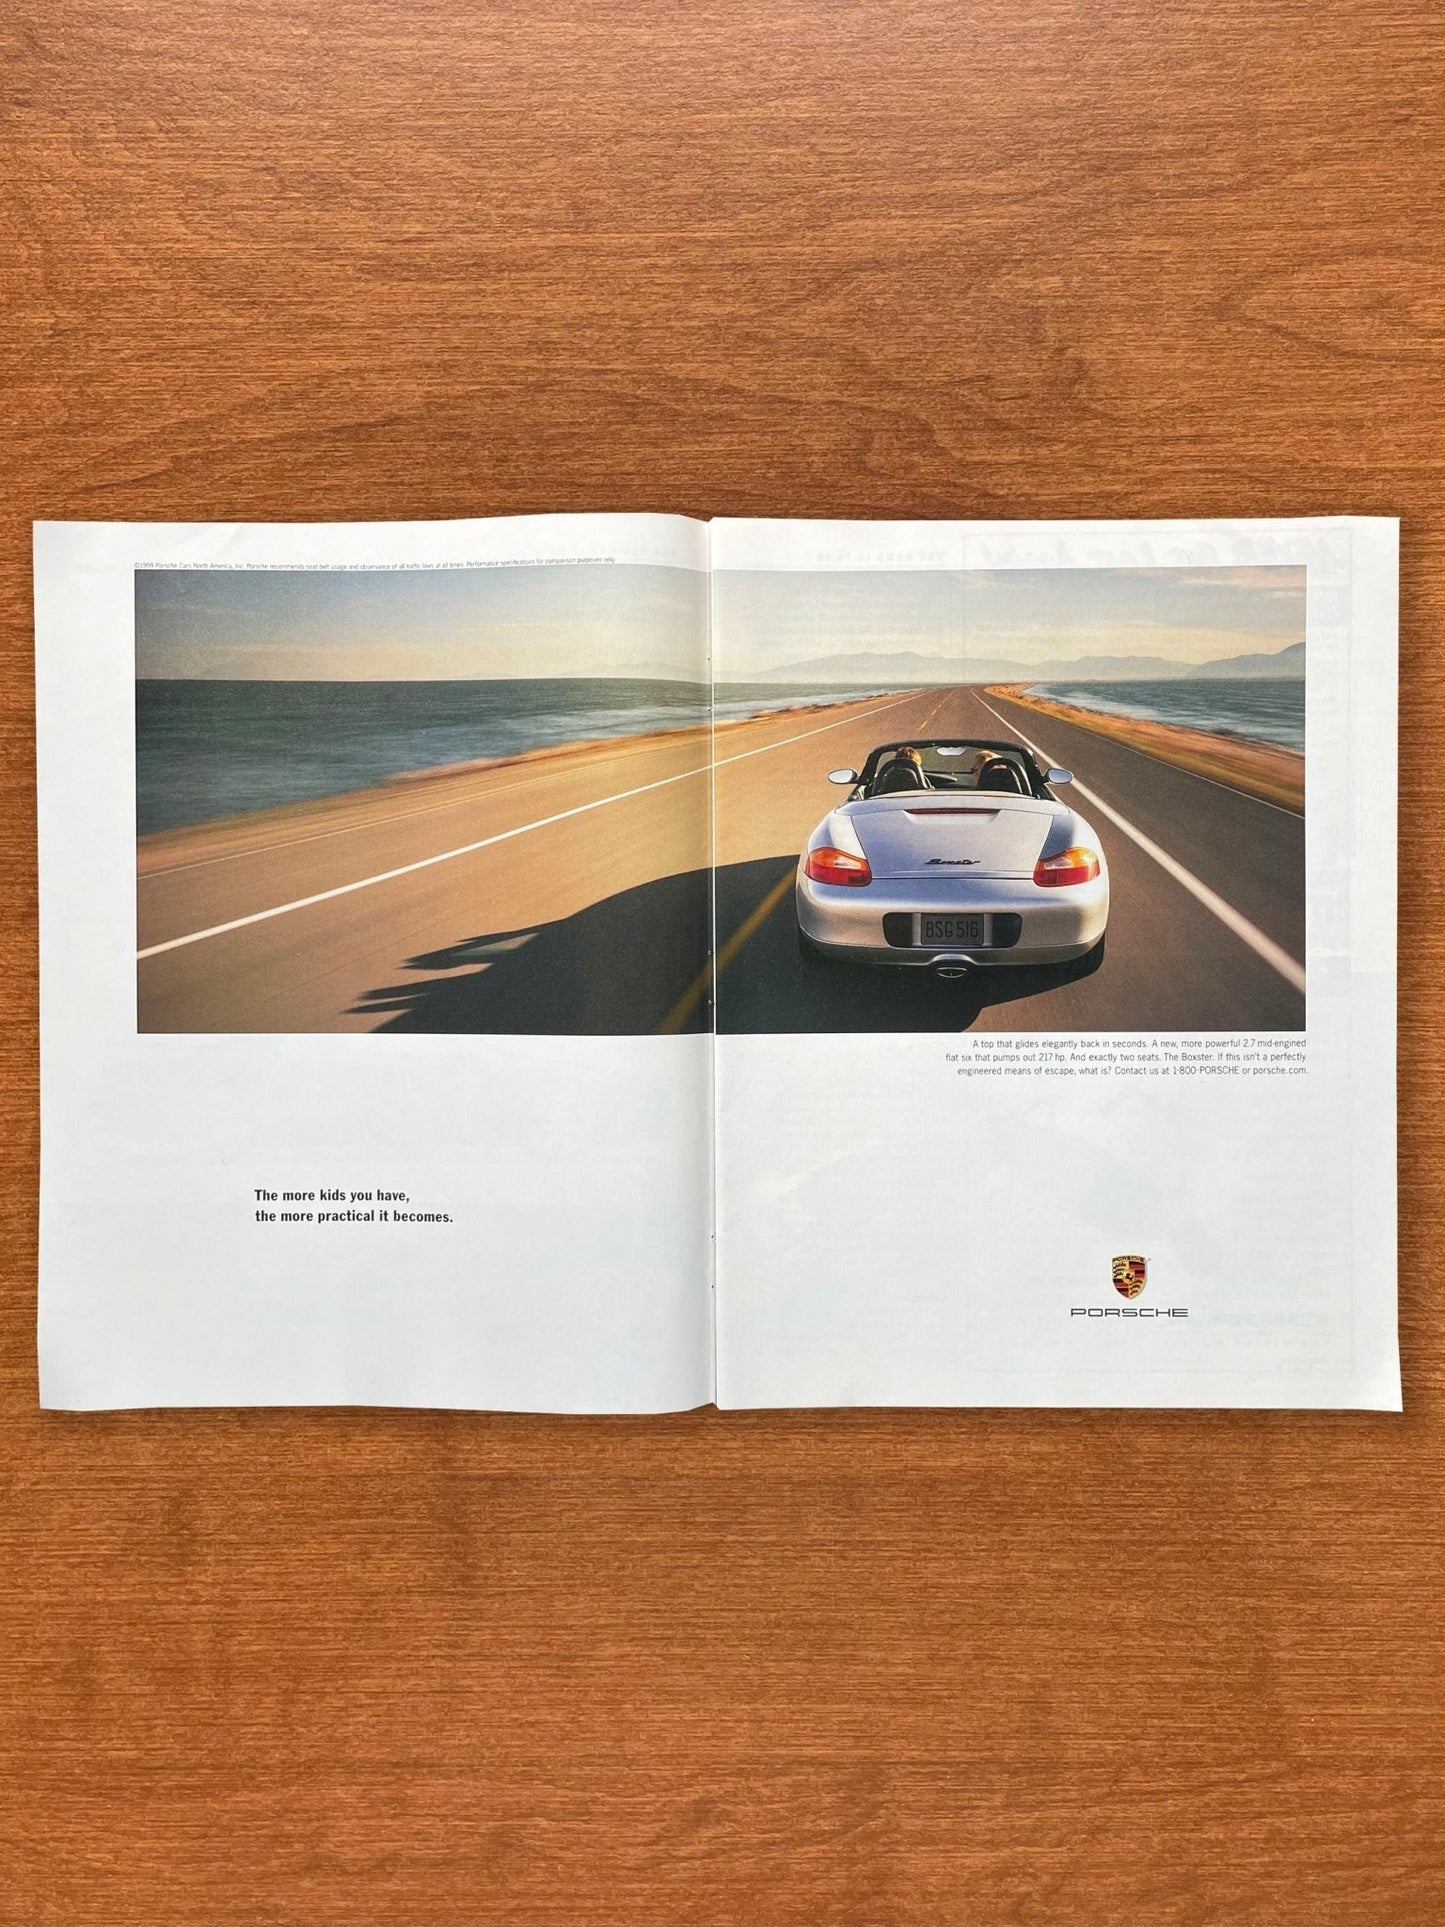 1999 Porsche Boxster "The more kids you have..." Advertisement